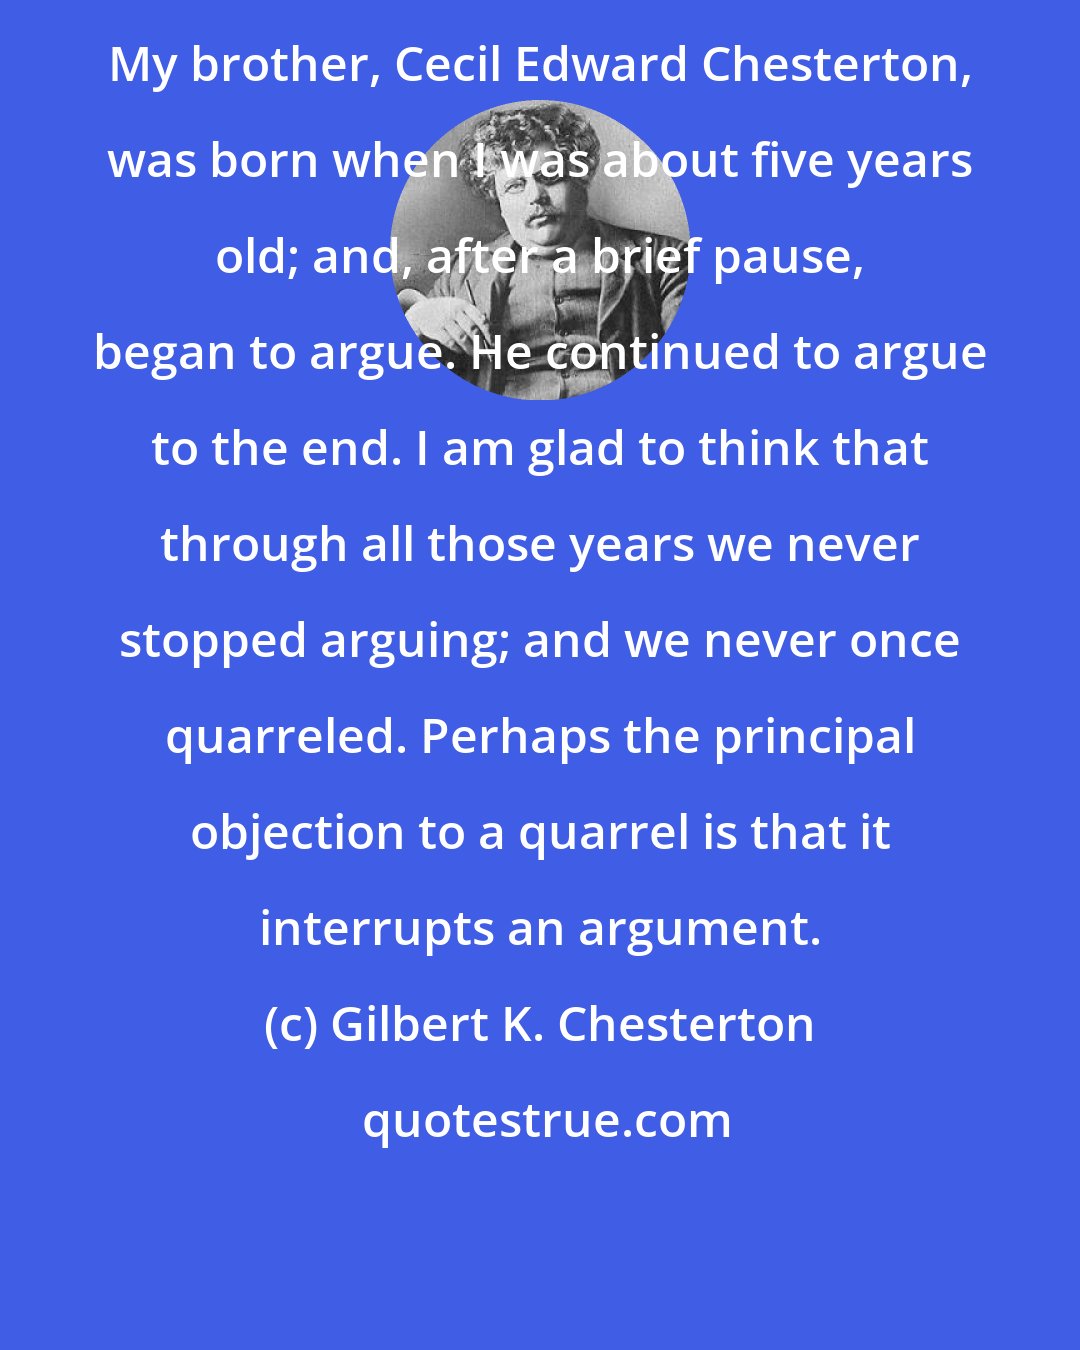 Gilbert K. Chesterton: My brother, Cecil Edward Chesterton, was born when I was about five years old; and, after a brief pause, began to argue. He continued to argue to the end. I am glad to think that through all those years we never stopped arguing; and we never once quarreled. Perhaps the principal objection to a quarrel is that it interrupts an argument.